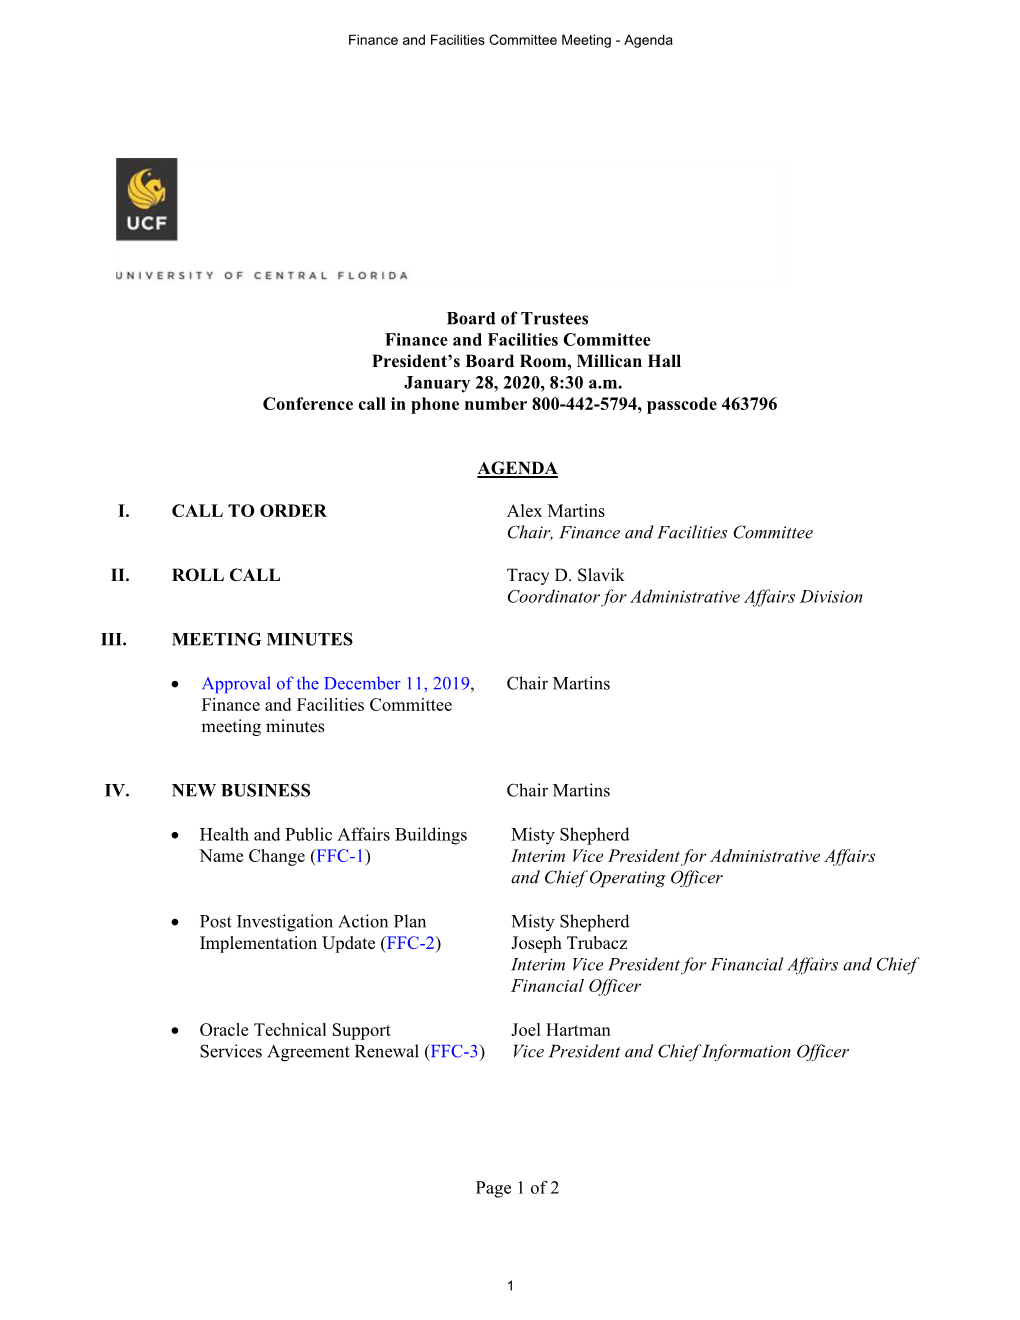 Page 1 of 2 Board of Trustees Finance and Facilities Committee